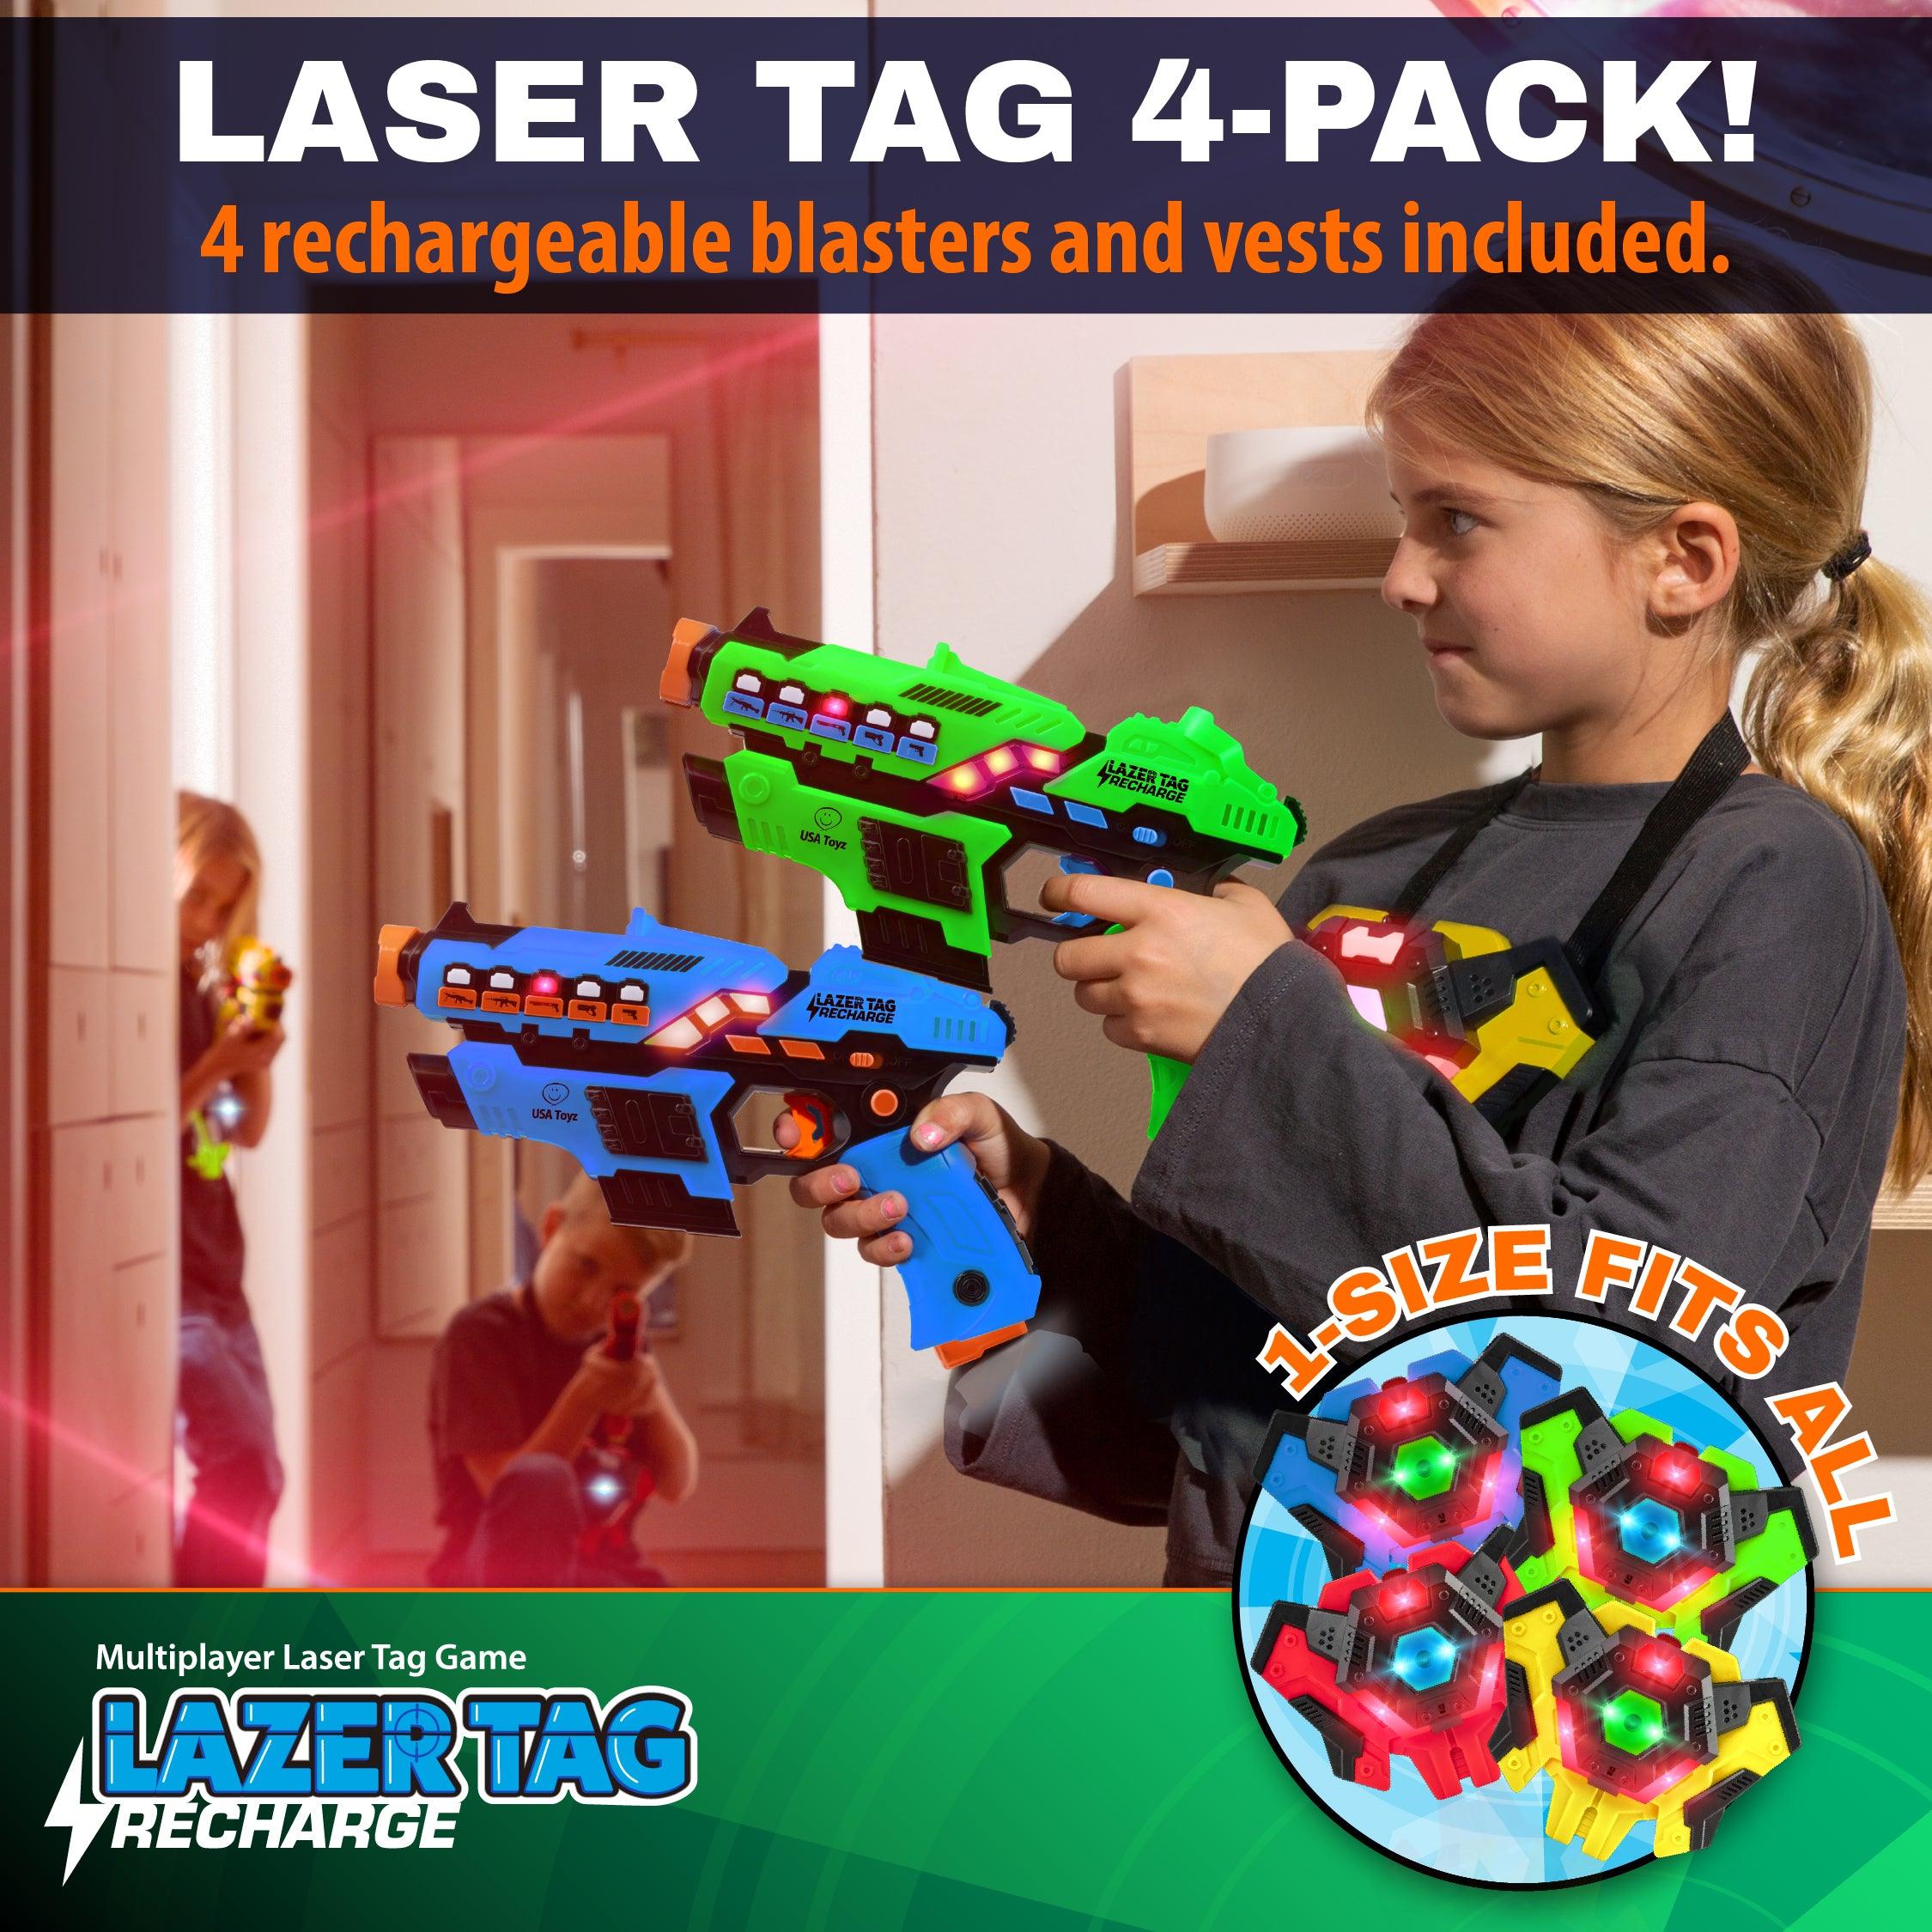 Rechargeable Laser Tag Light Force Edition - Nantucket Kids